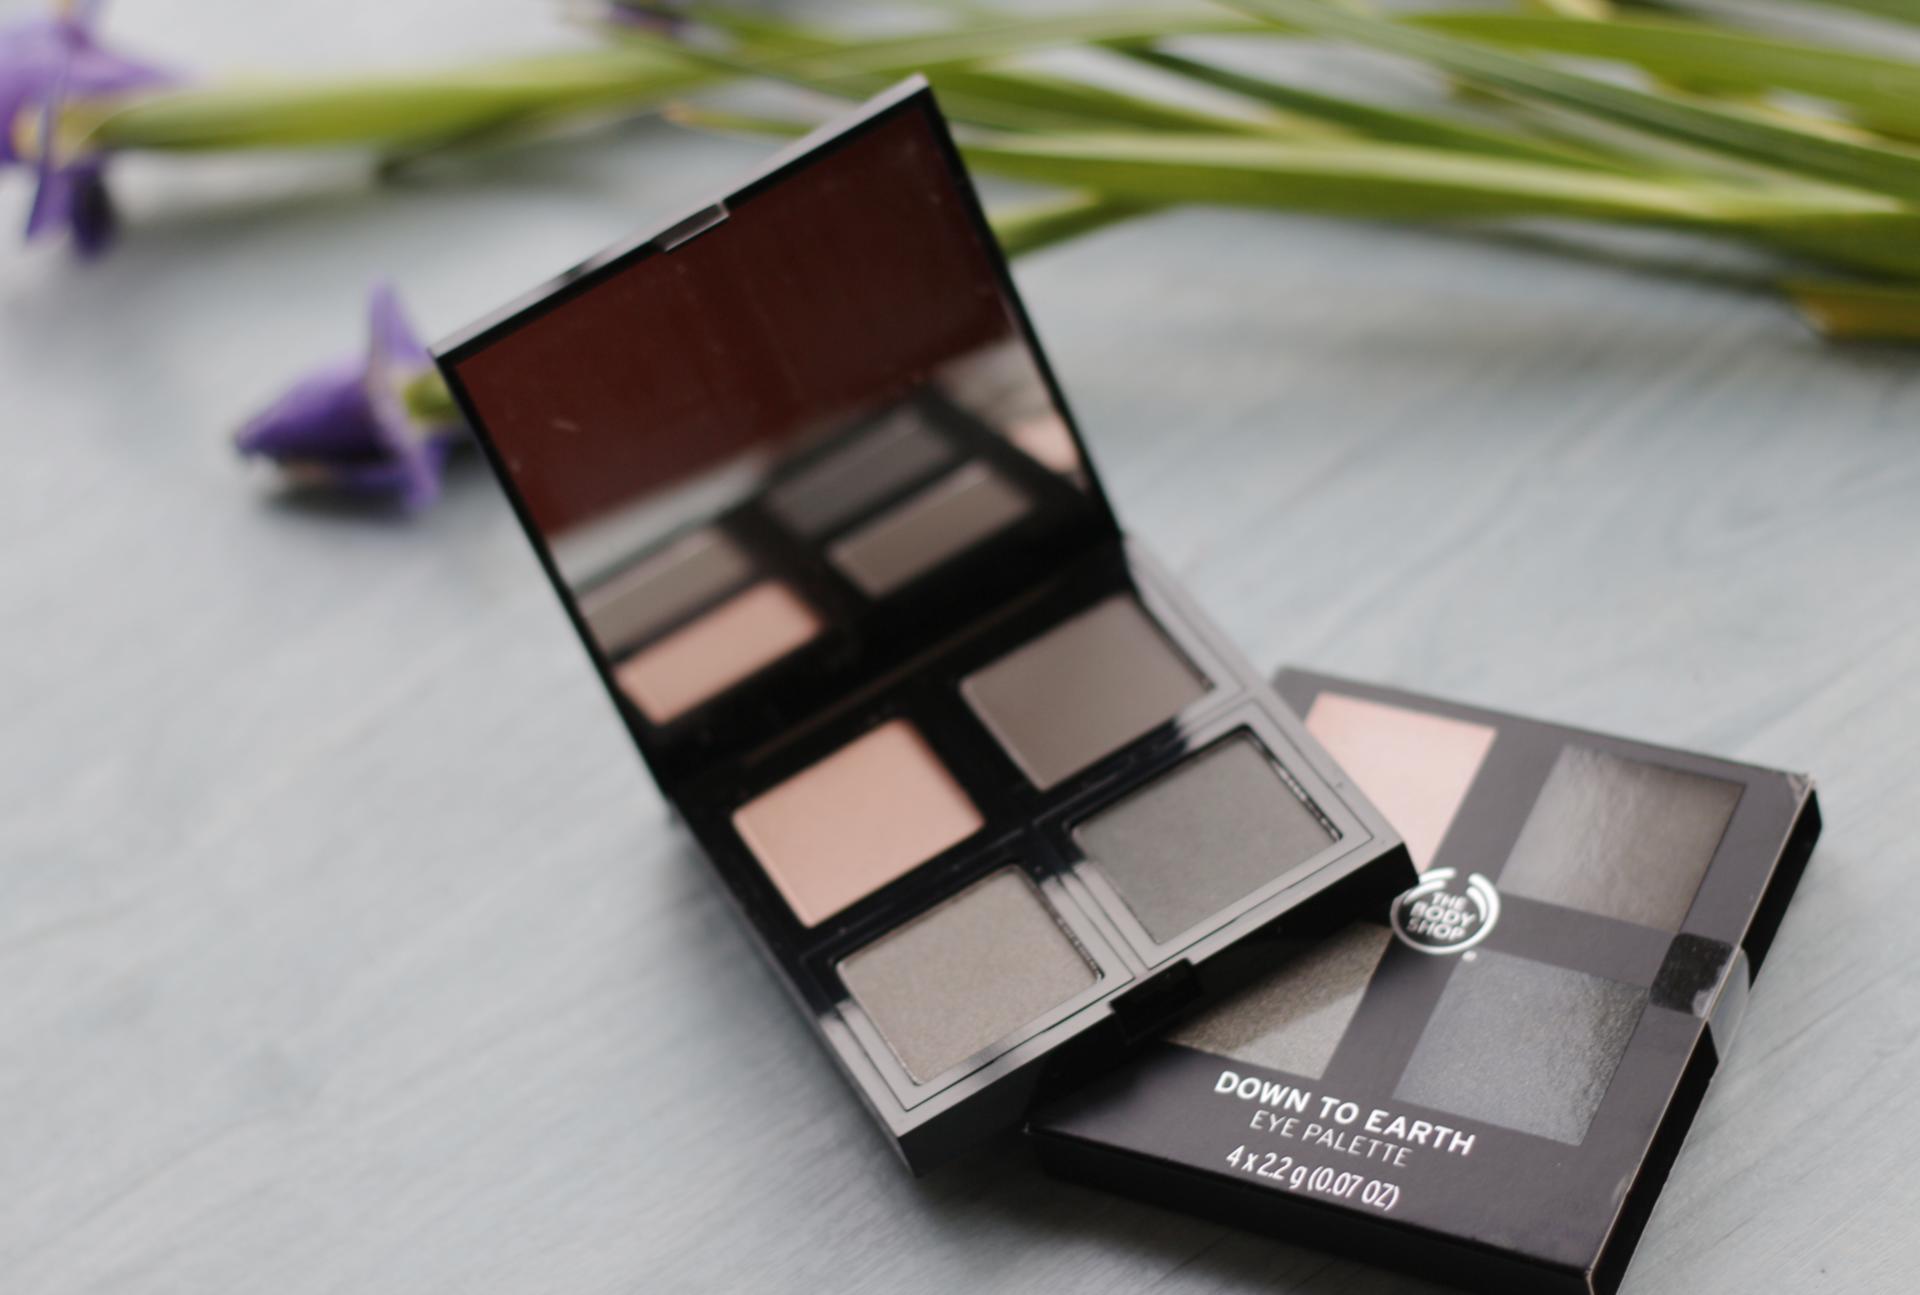 The Body Shop Down To Earth Eyeshadow Palettes Review